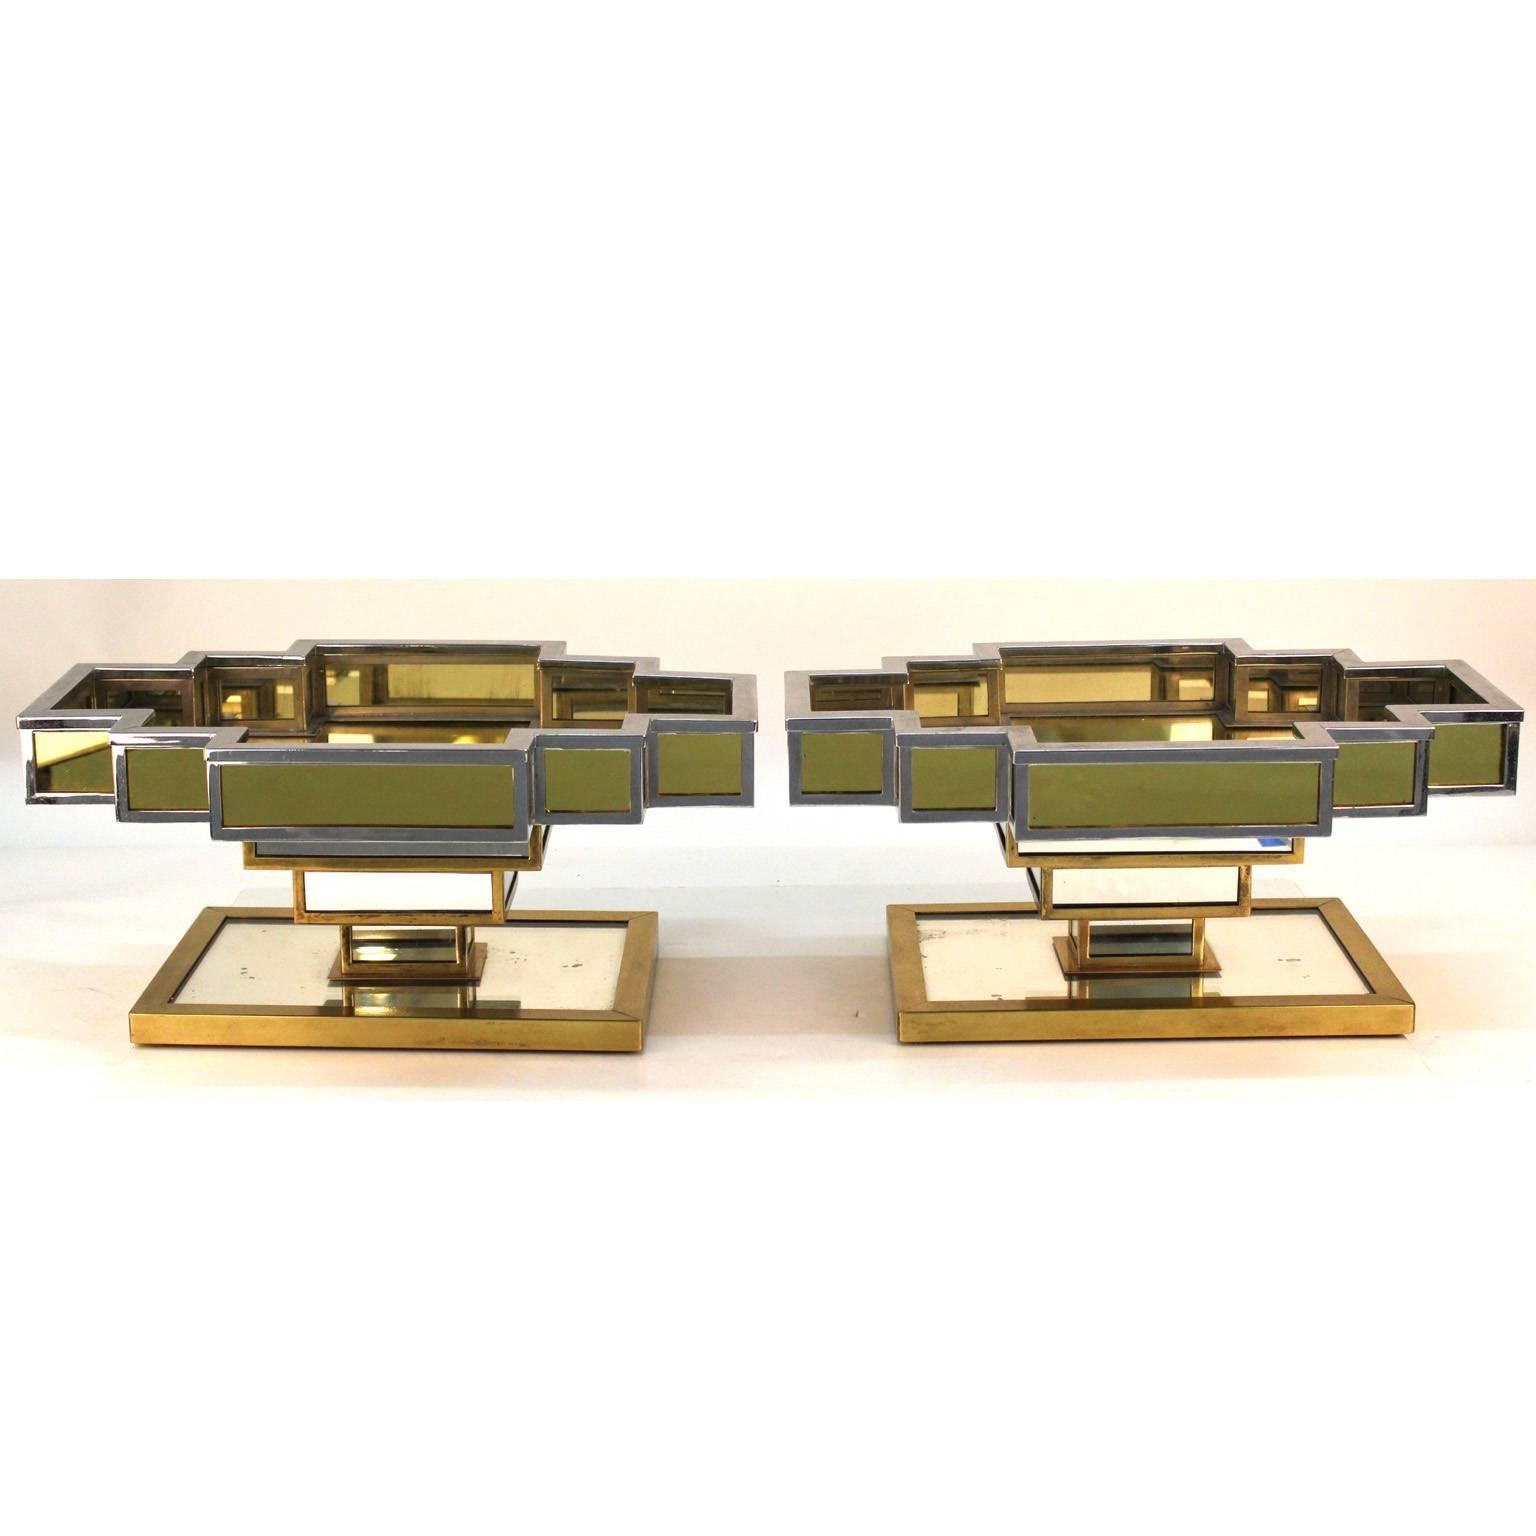 A pair of French Art Deco architectural centrepieces with amber and clear mirrored surfaces and a nickel on brass structure. Interesting architectural design with multi-faceted reflections. Very good original condition without chips.